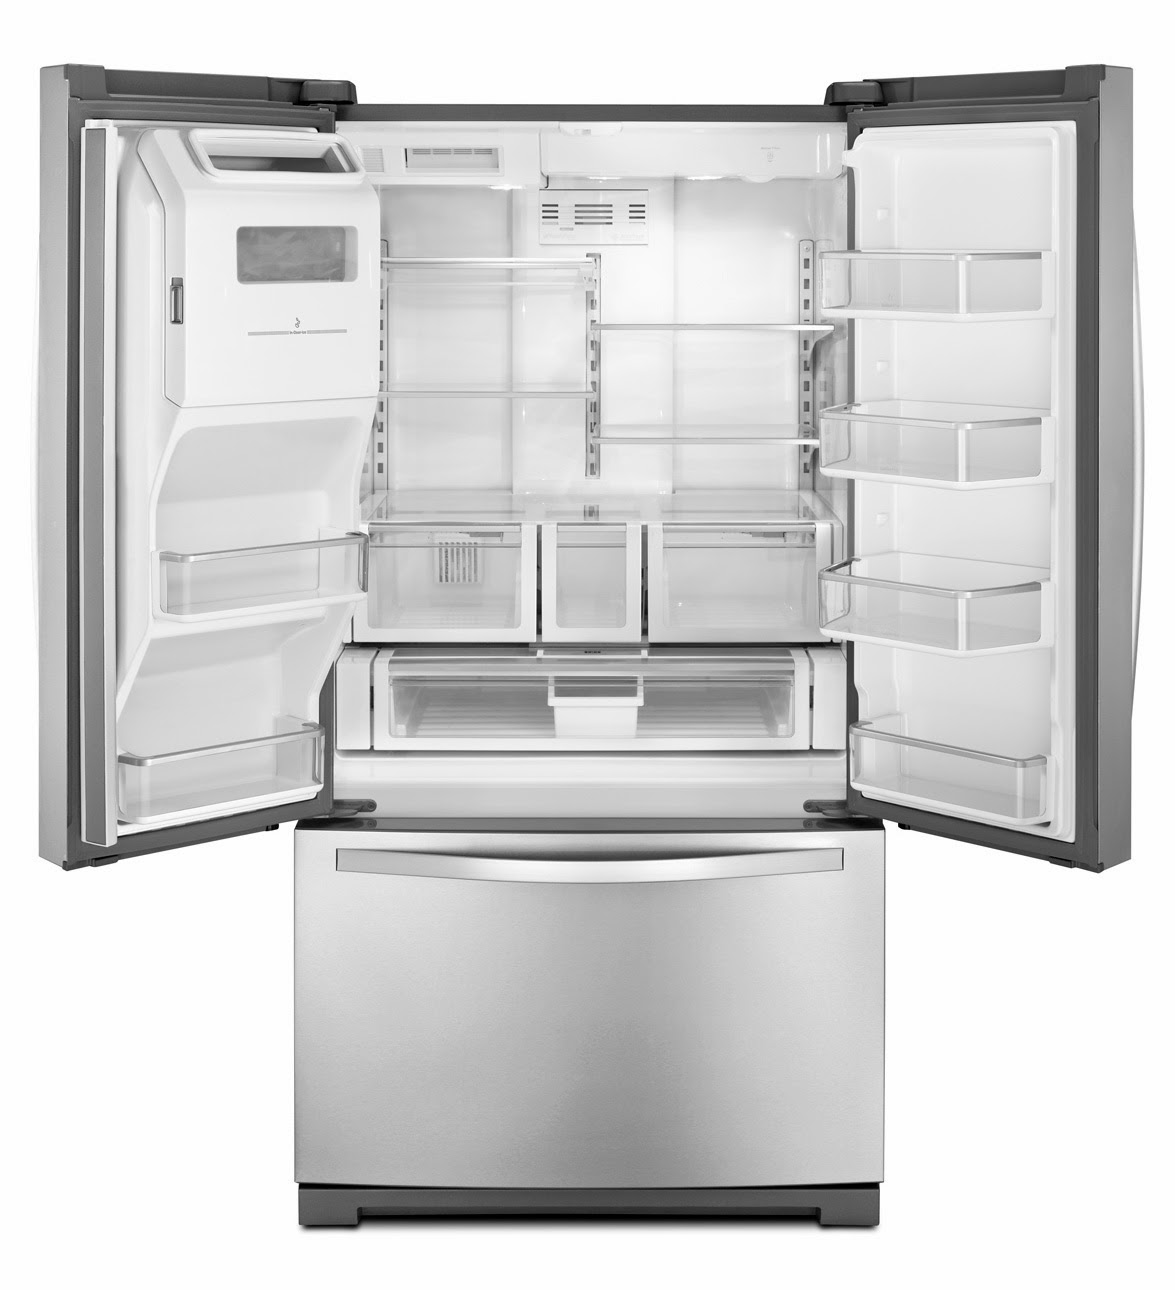 Are There Any Recalls On Whirlpool Refrigerators